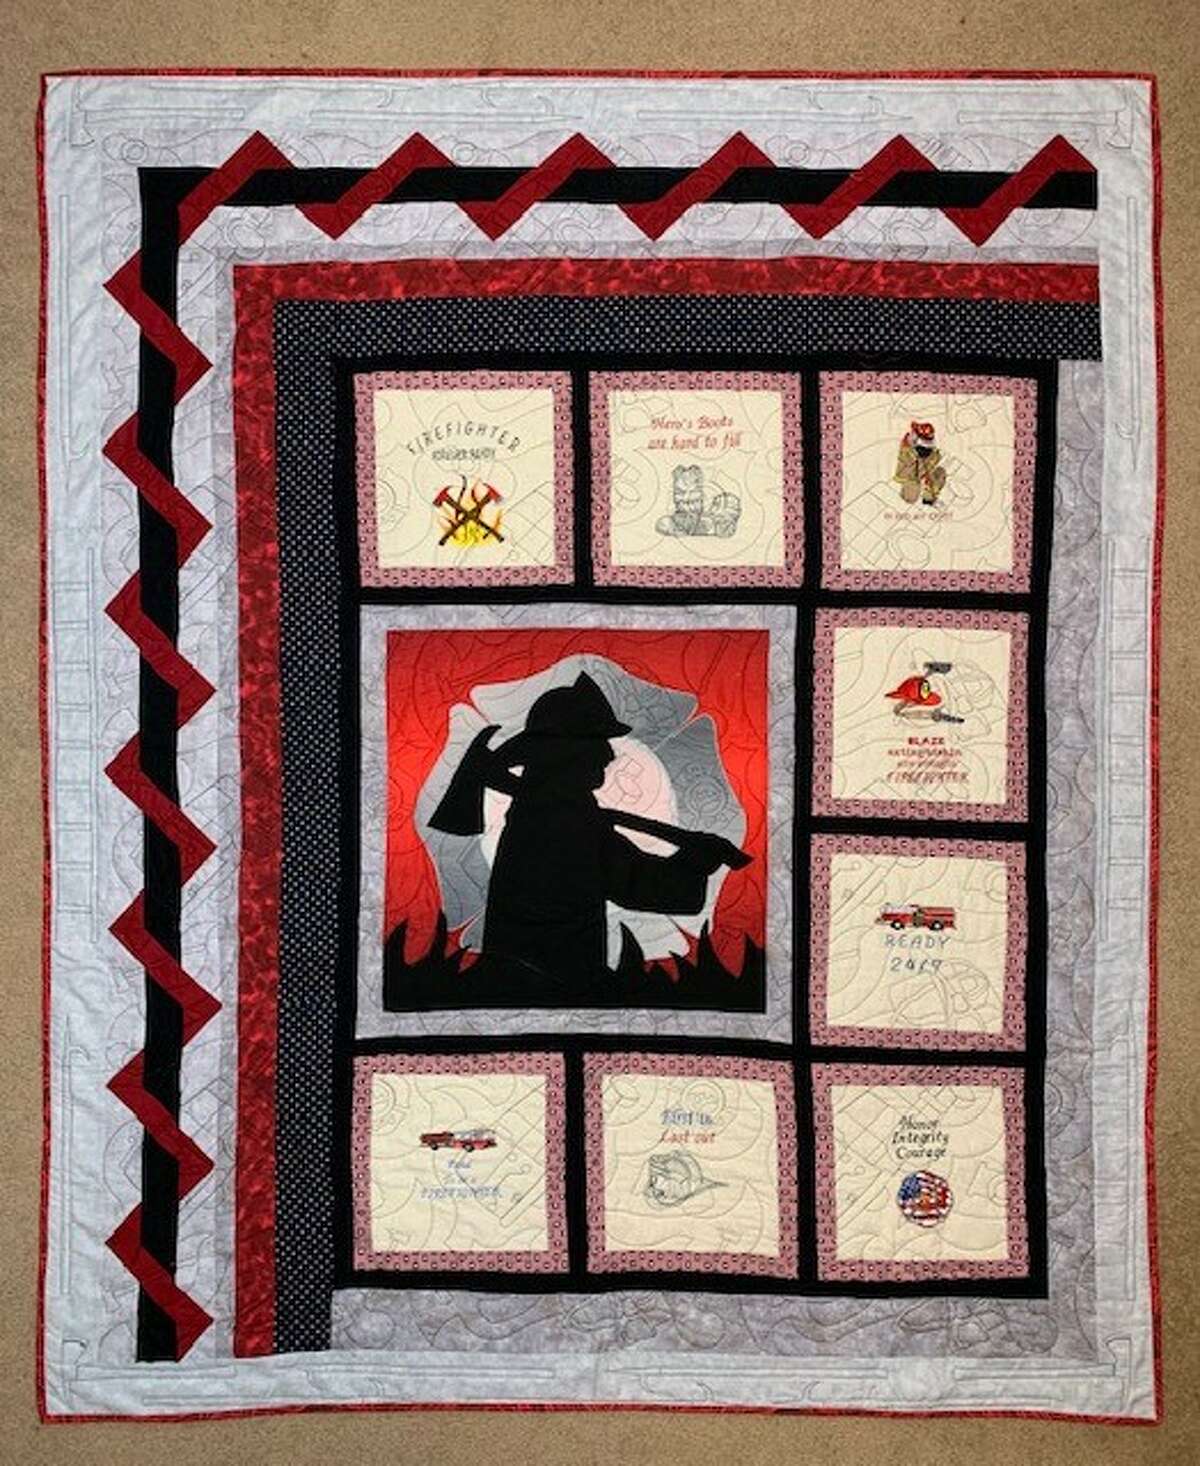 Floyd Country Christmas Ball organizers will auction off a special quilt.